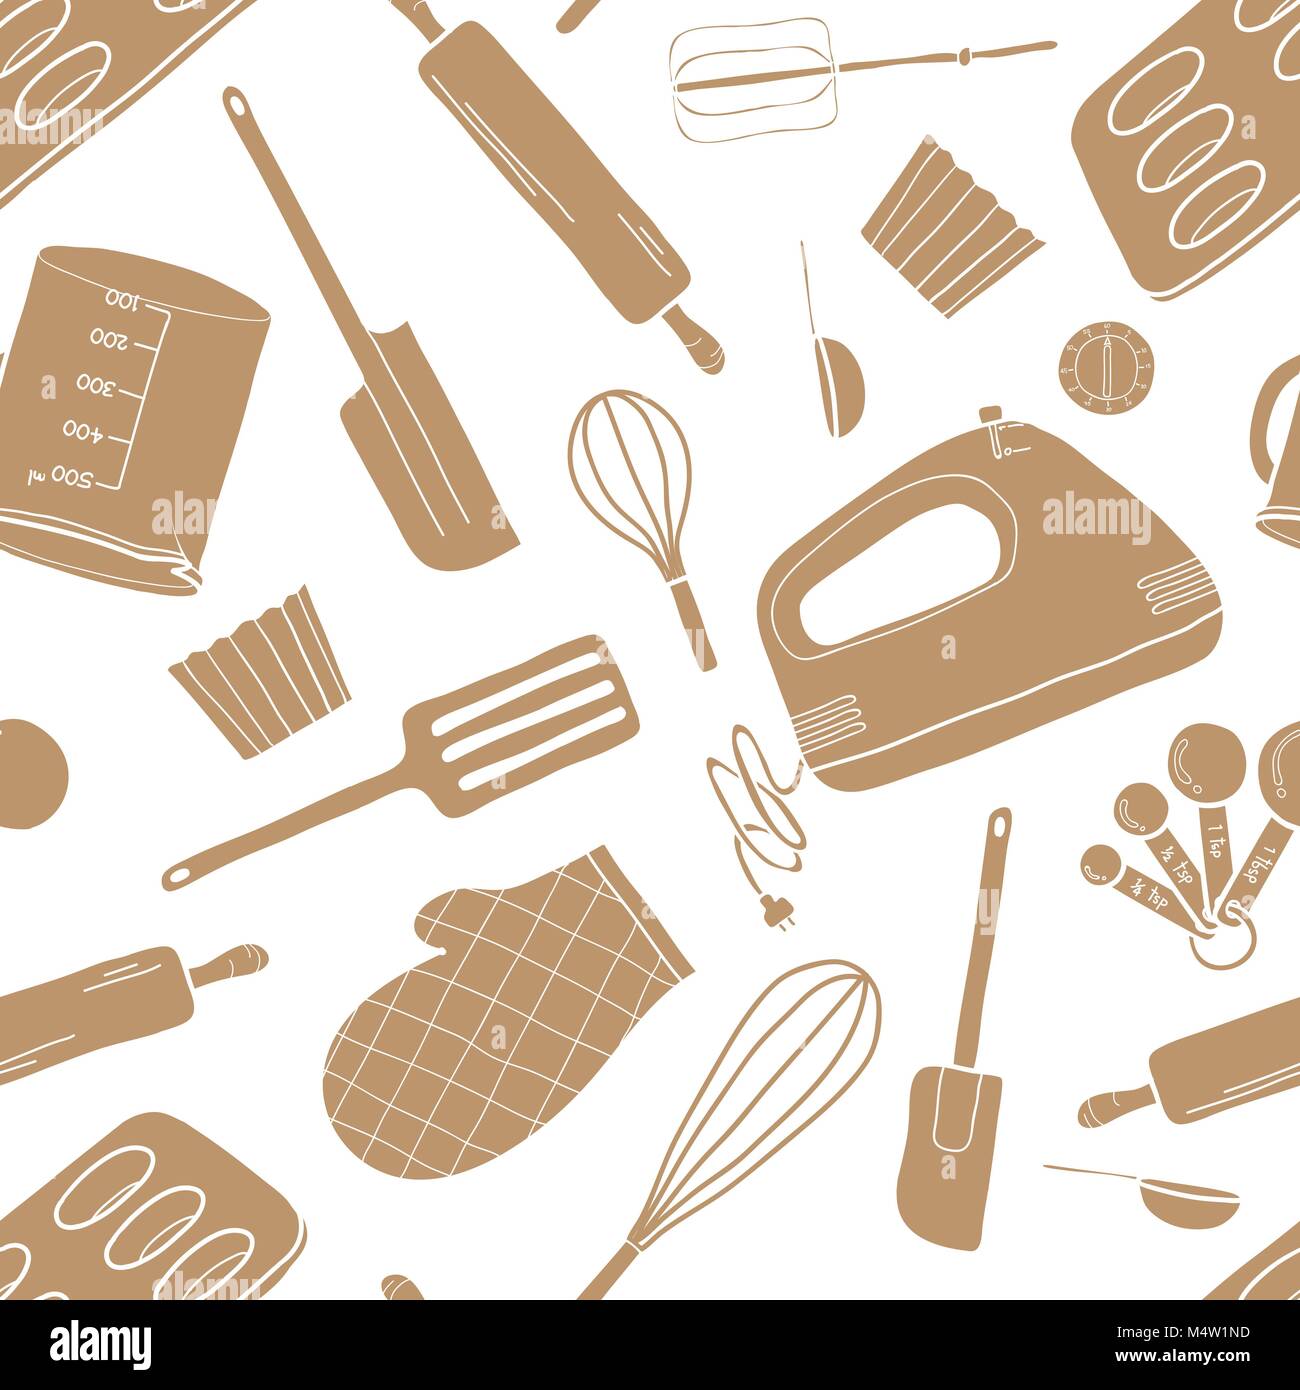 Seamless pattern of baking tools in brown silhouette random on white background. Cute vector illustration of cooking stuff in hand drawn style for bac Stock Vector